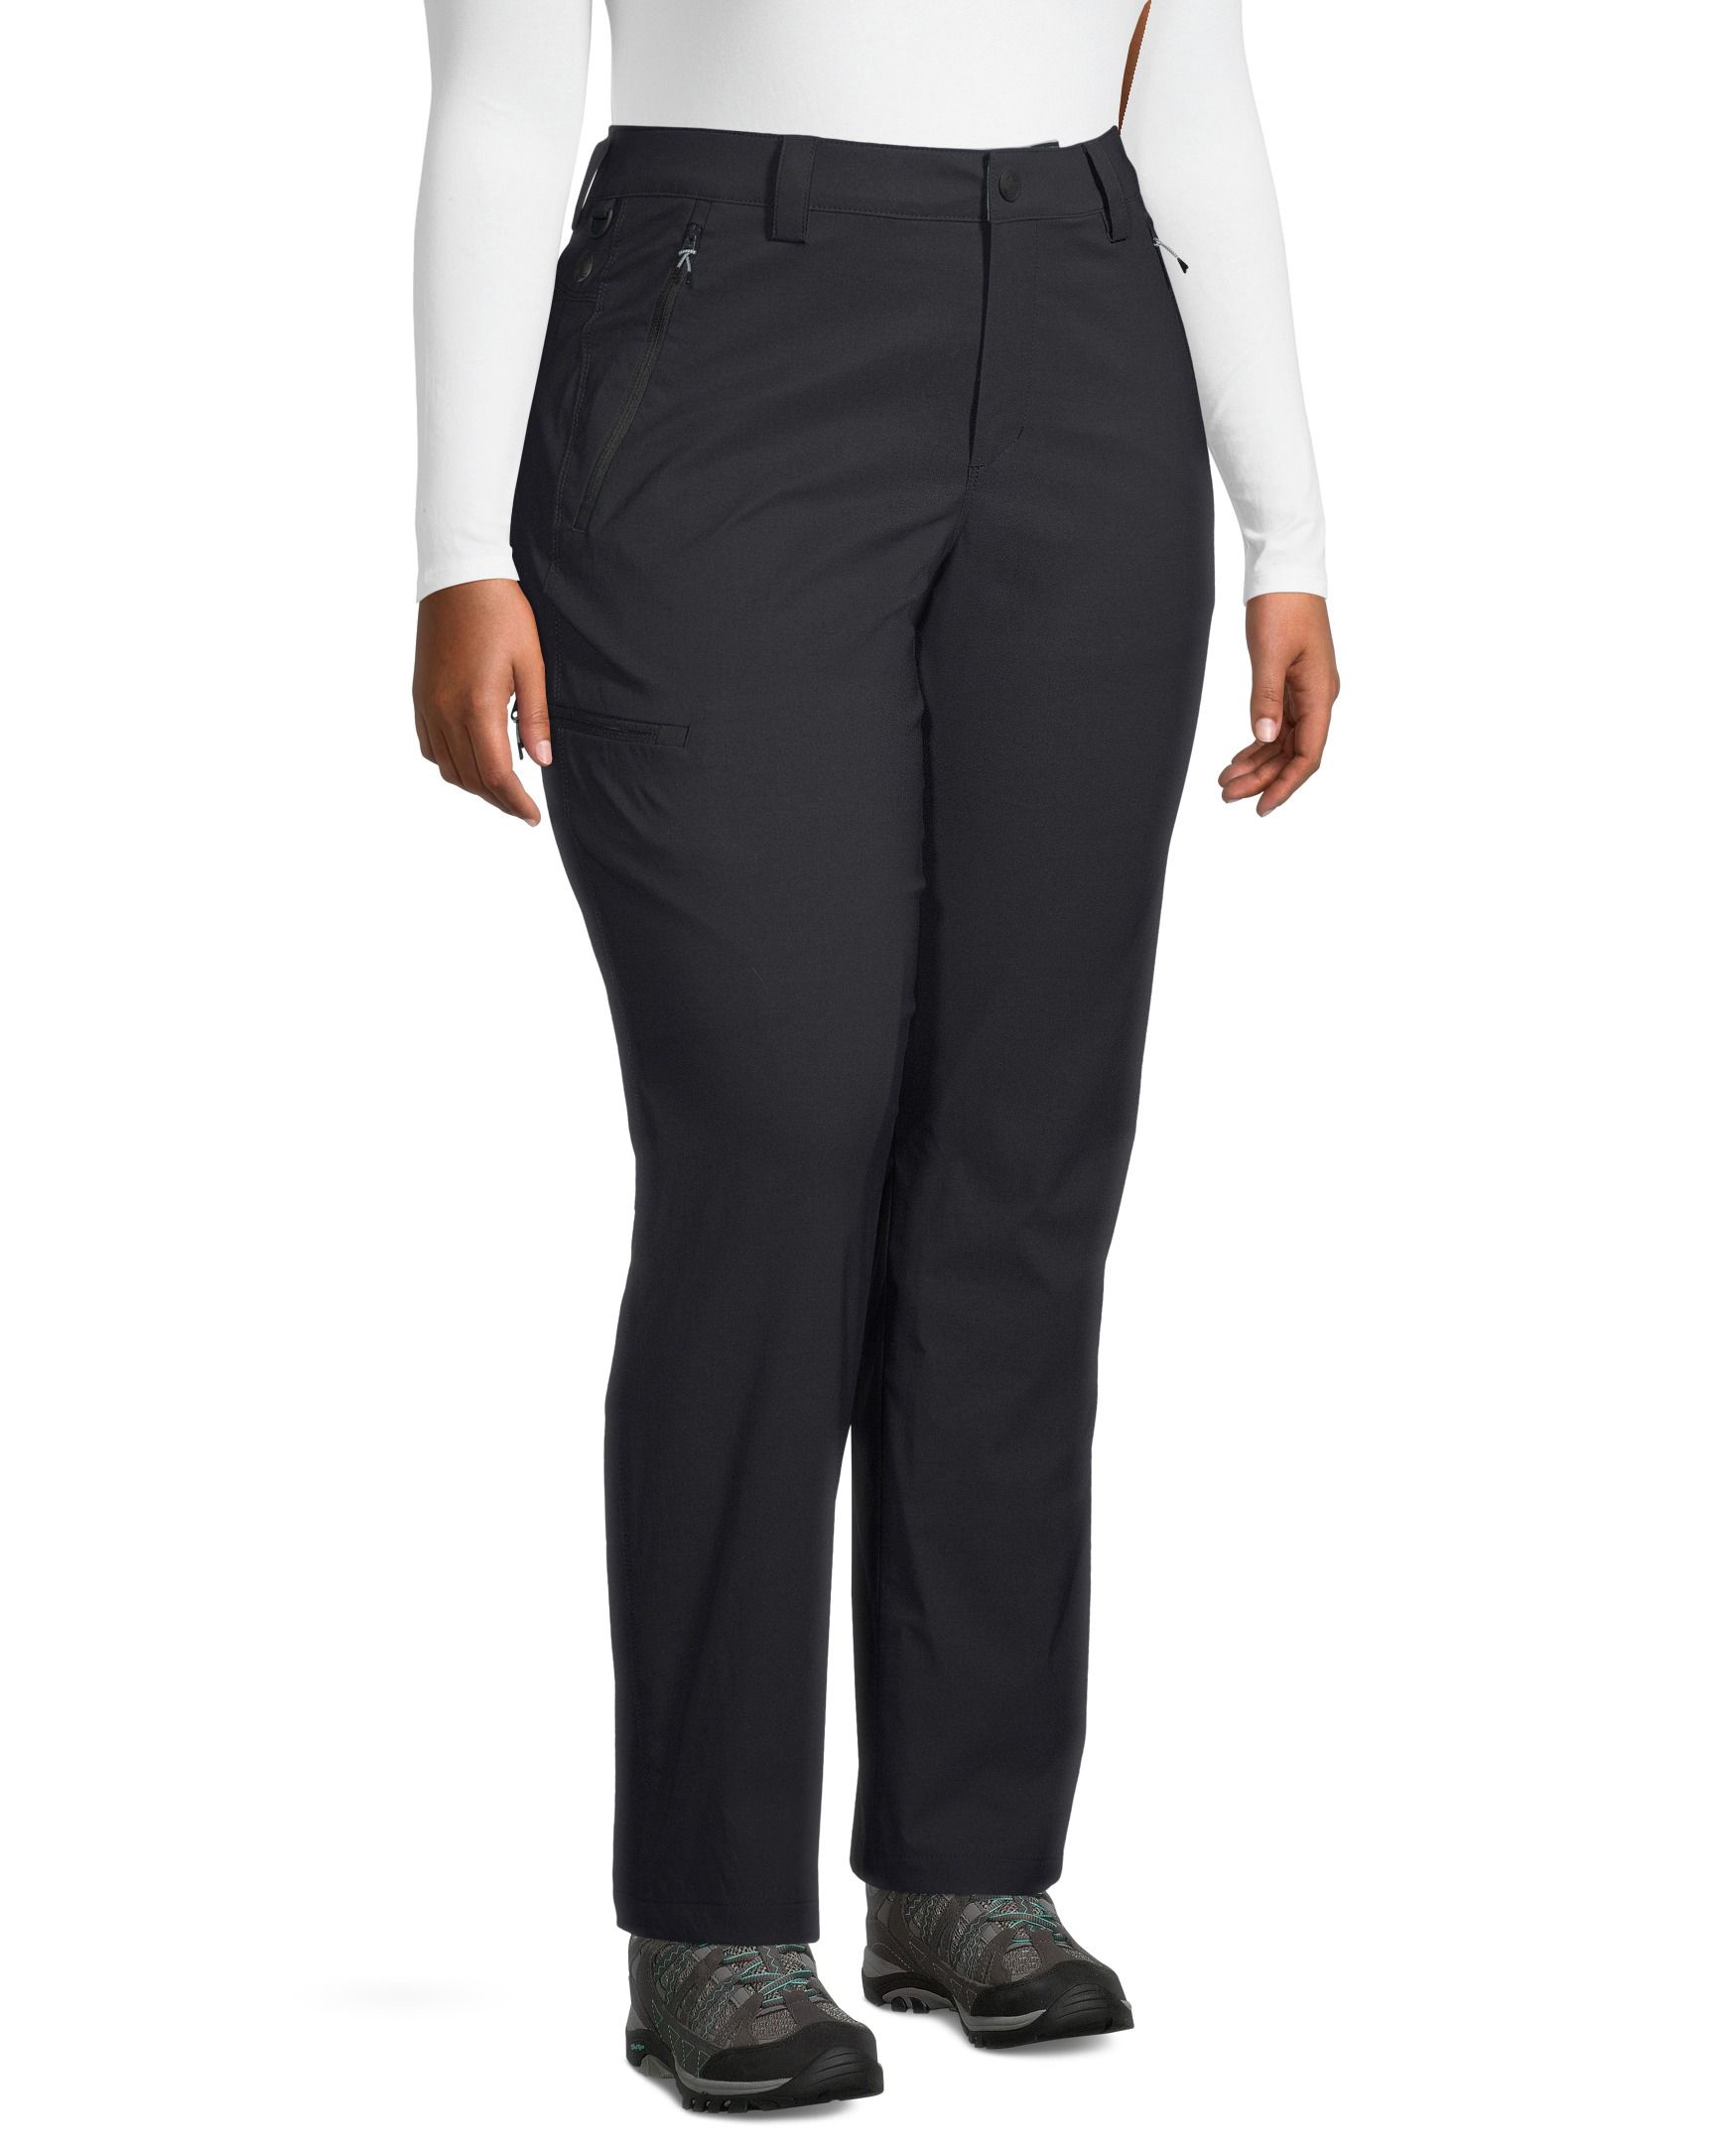 Kuhl Band Athletic Pants for Women